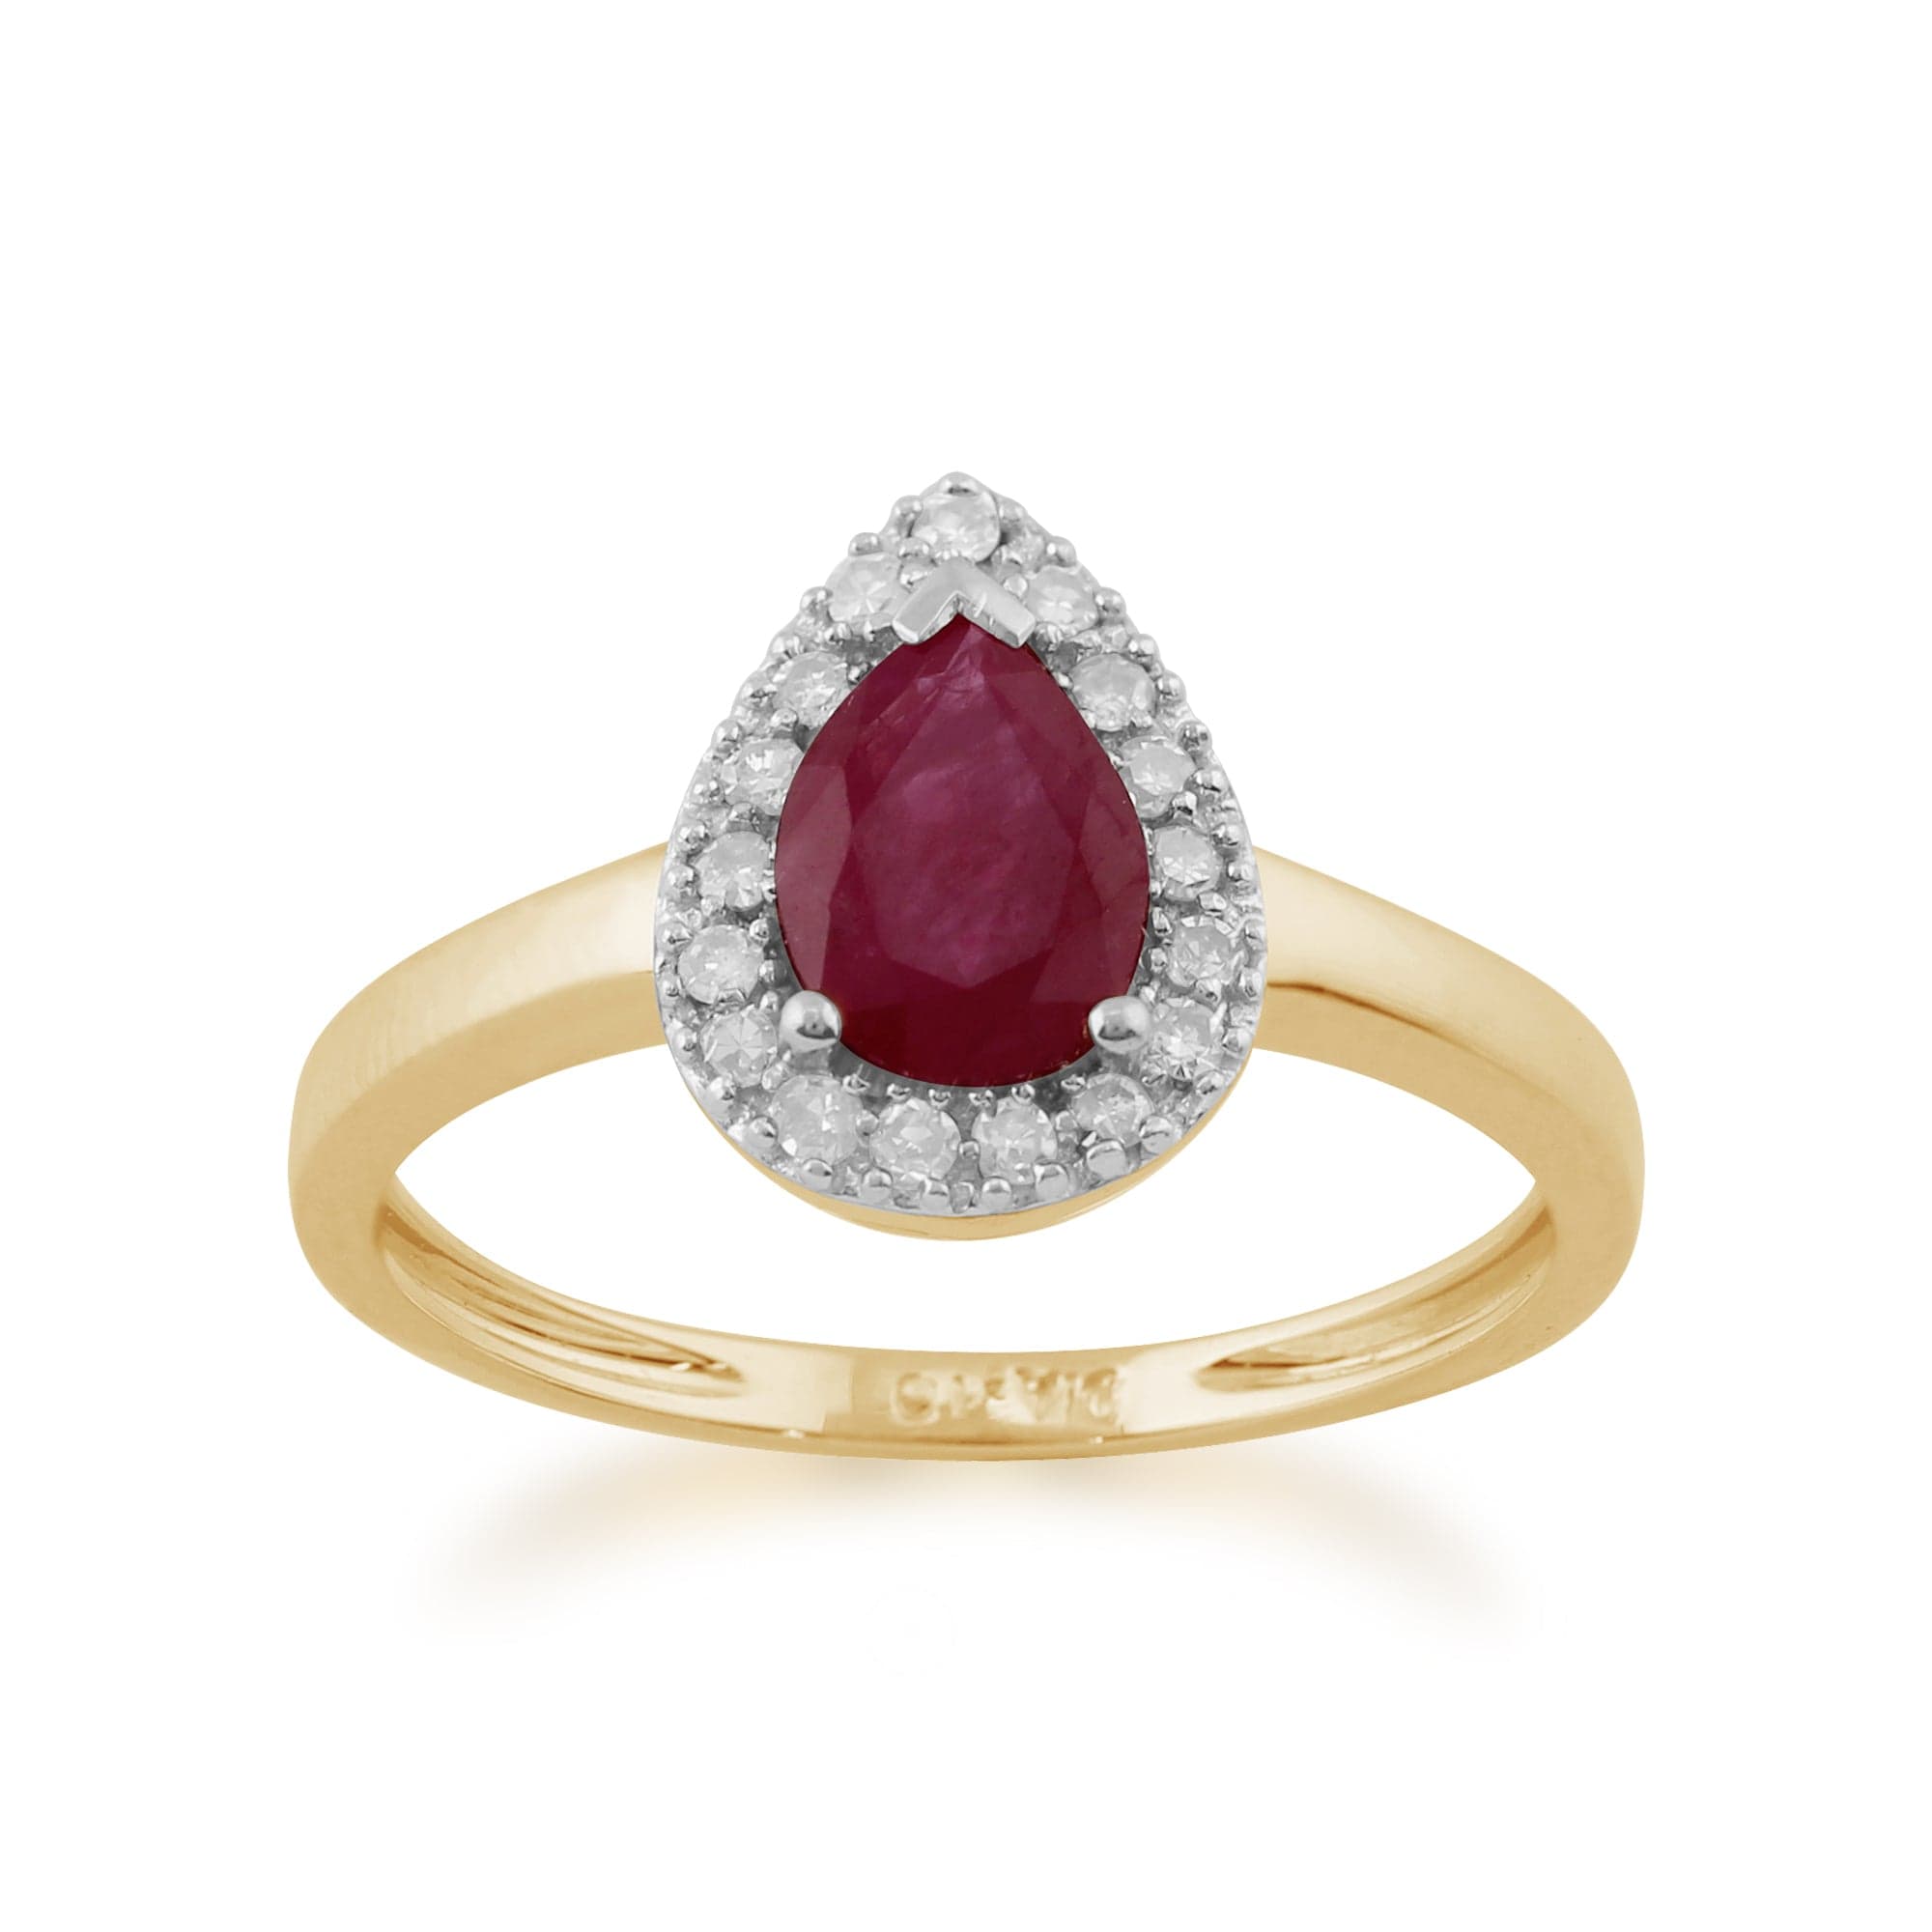 Classic Pear Shaped Ruby & Diamond Ring in 9ct Yellow Gold - Gemondo